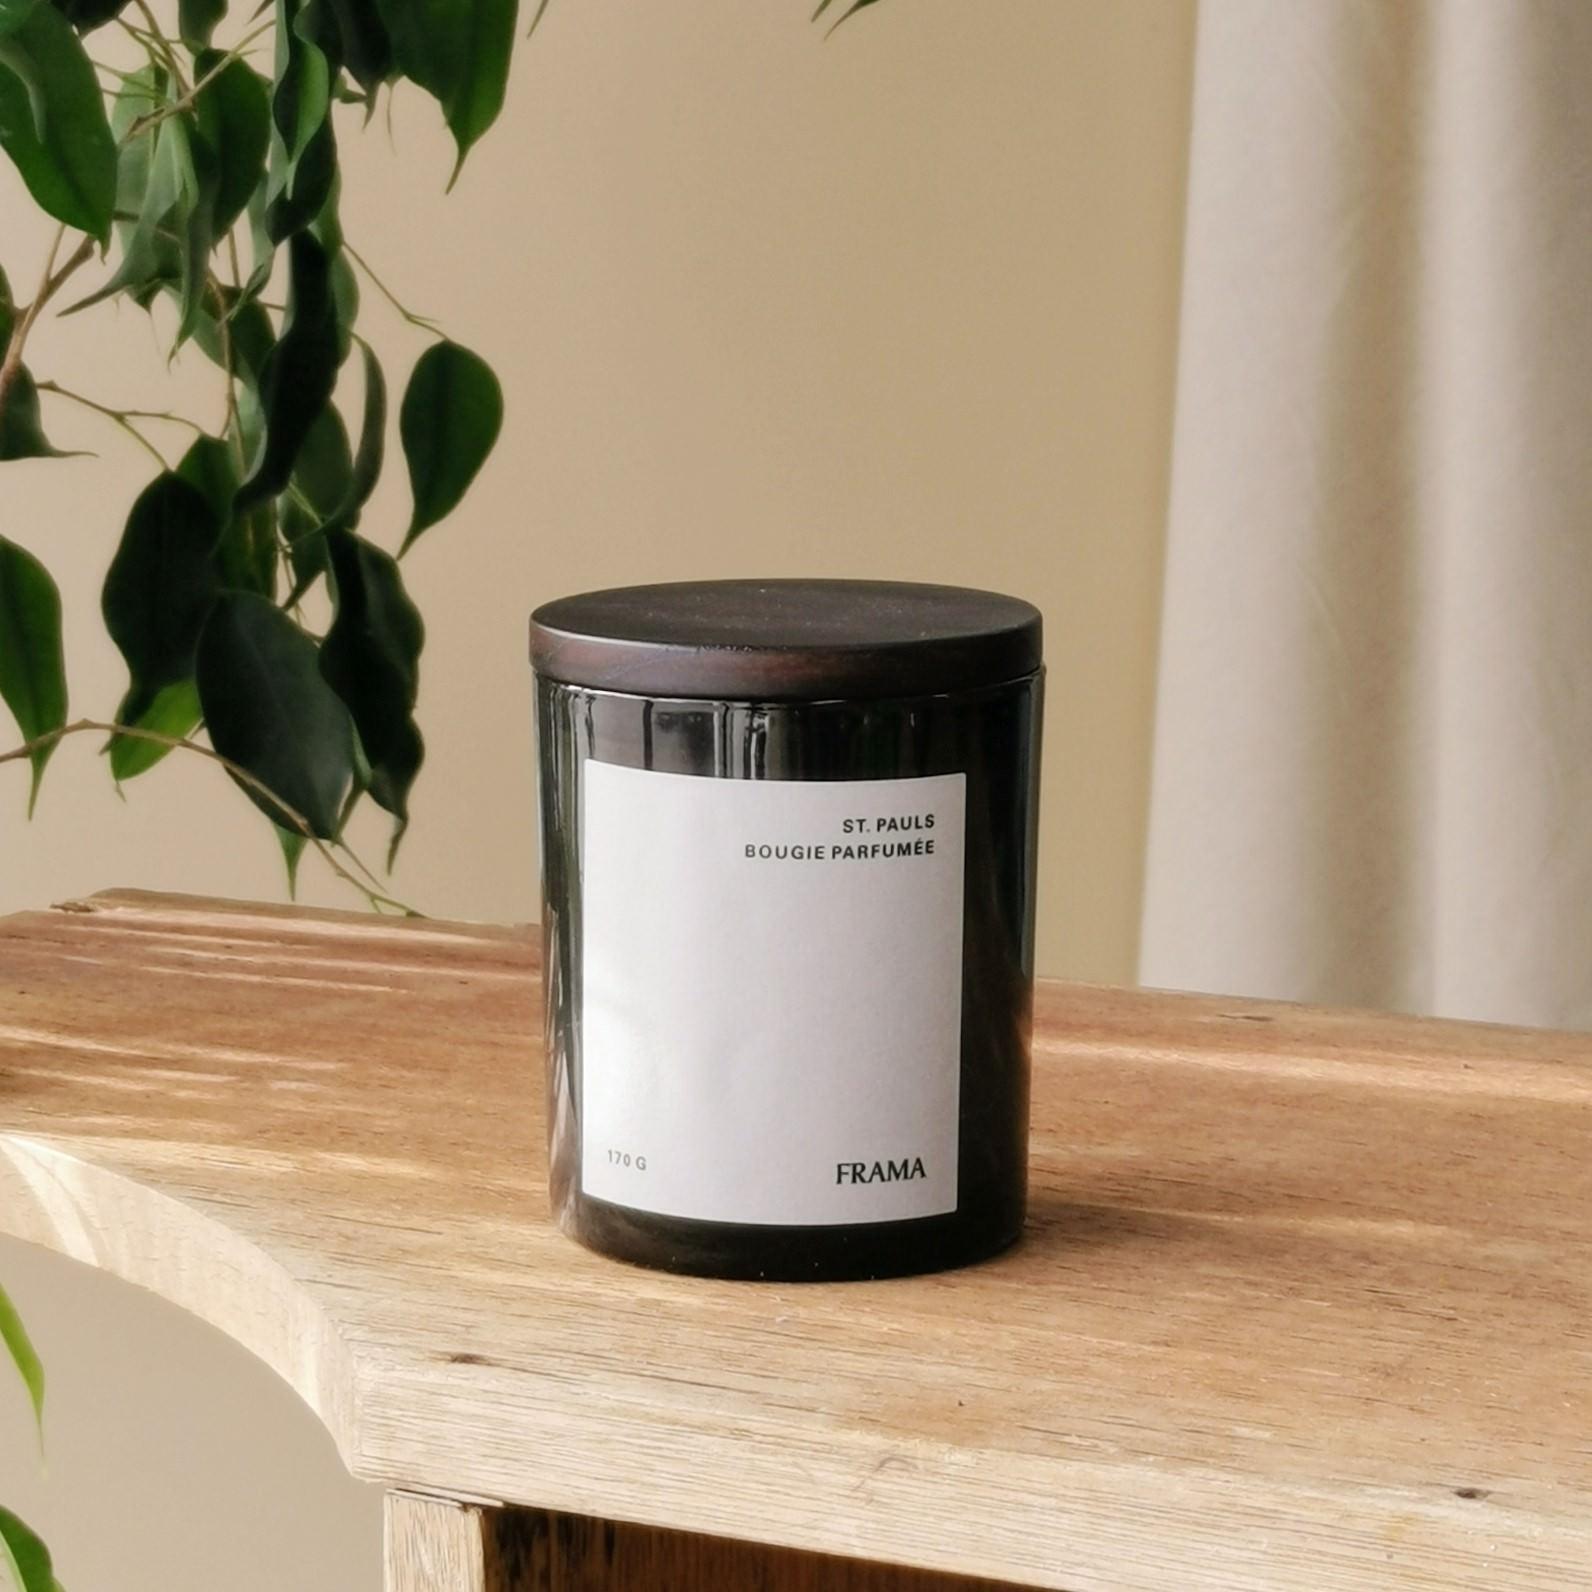 St. Pauls | Scented Candle | 170g By FRAMA - THE PLANT SOCIETY